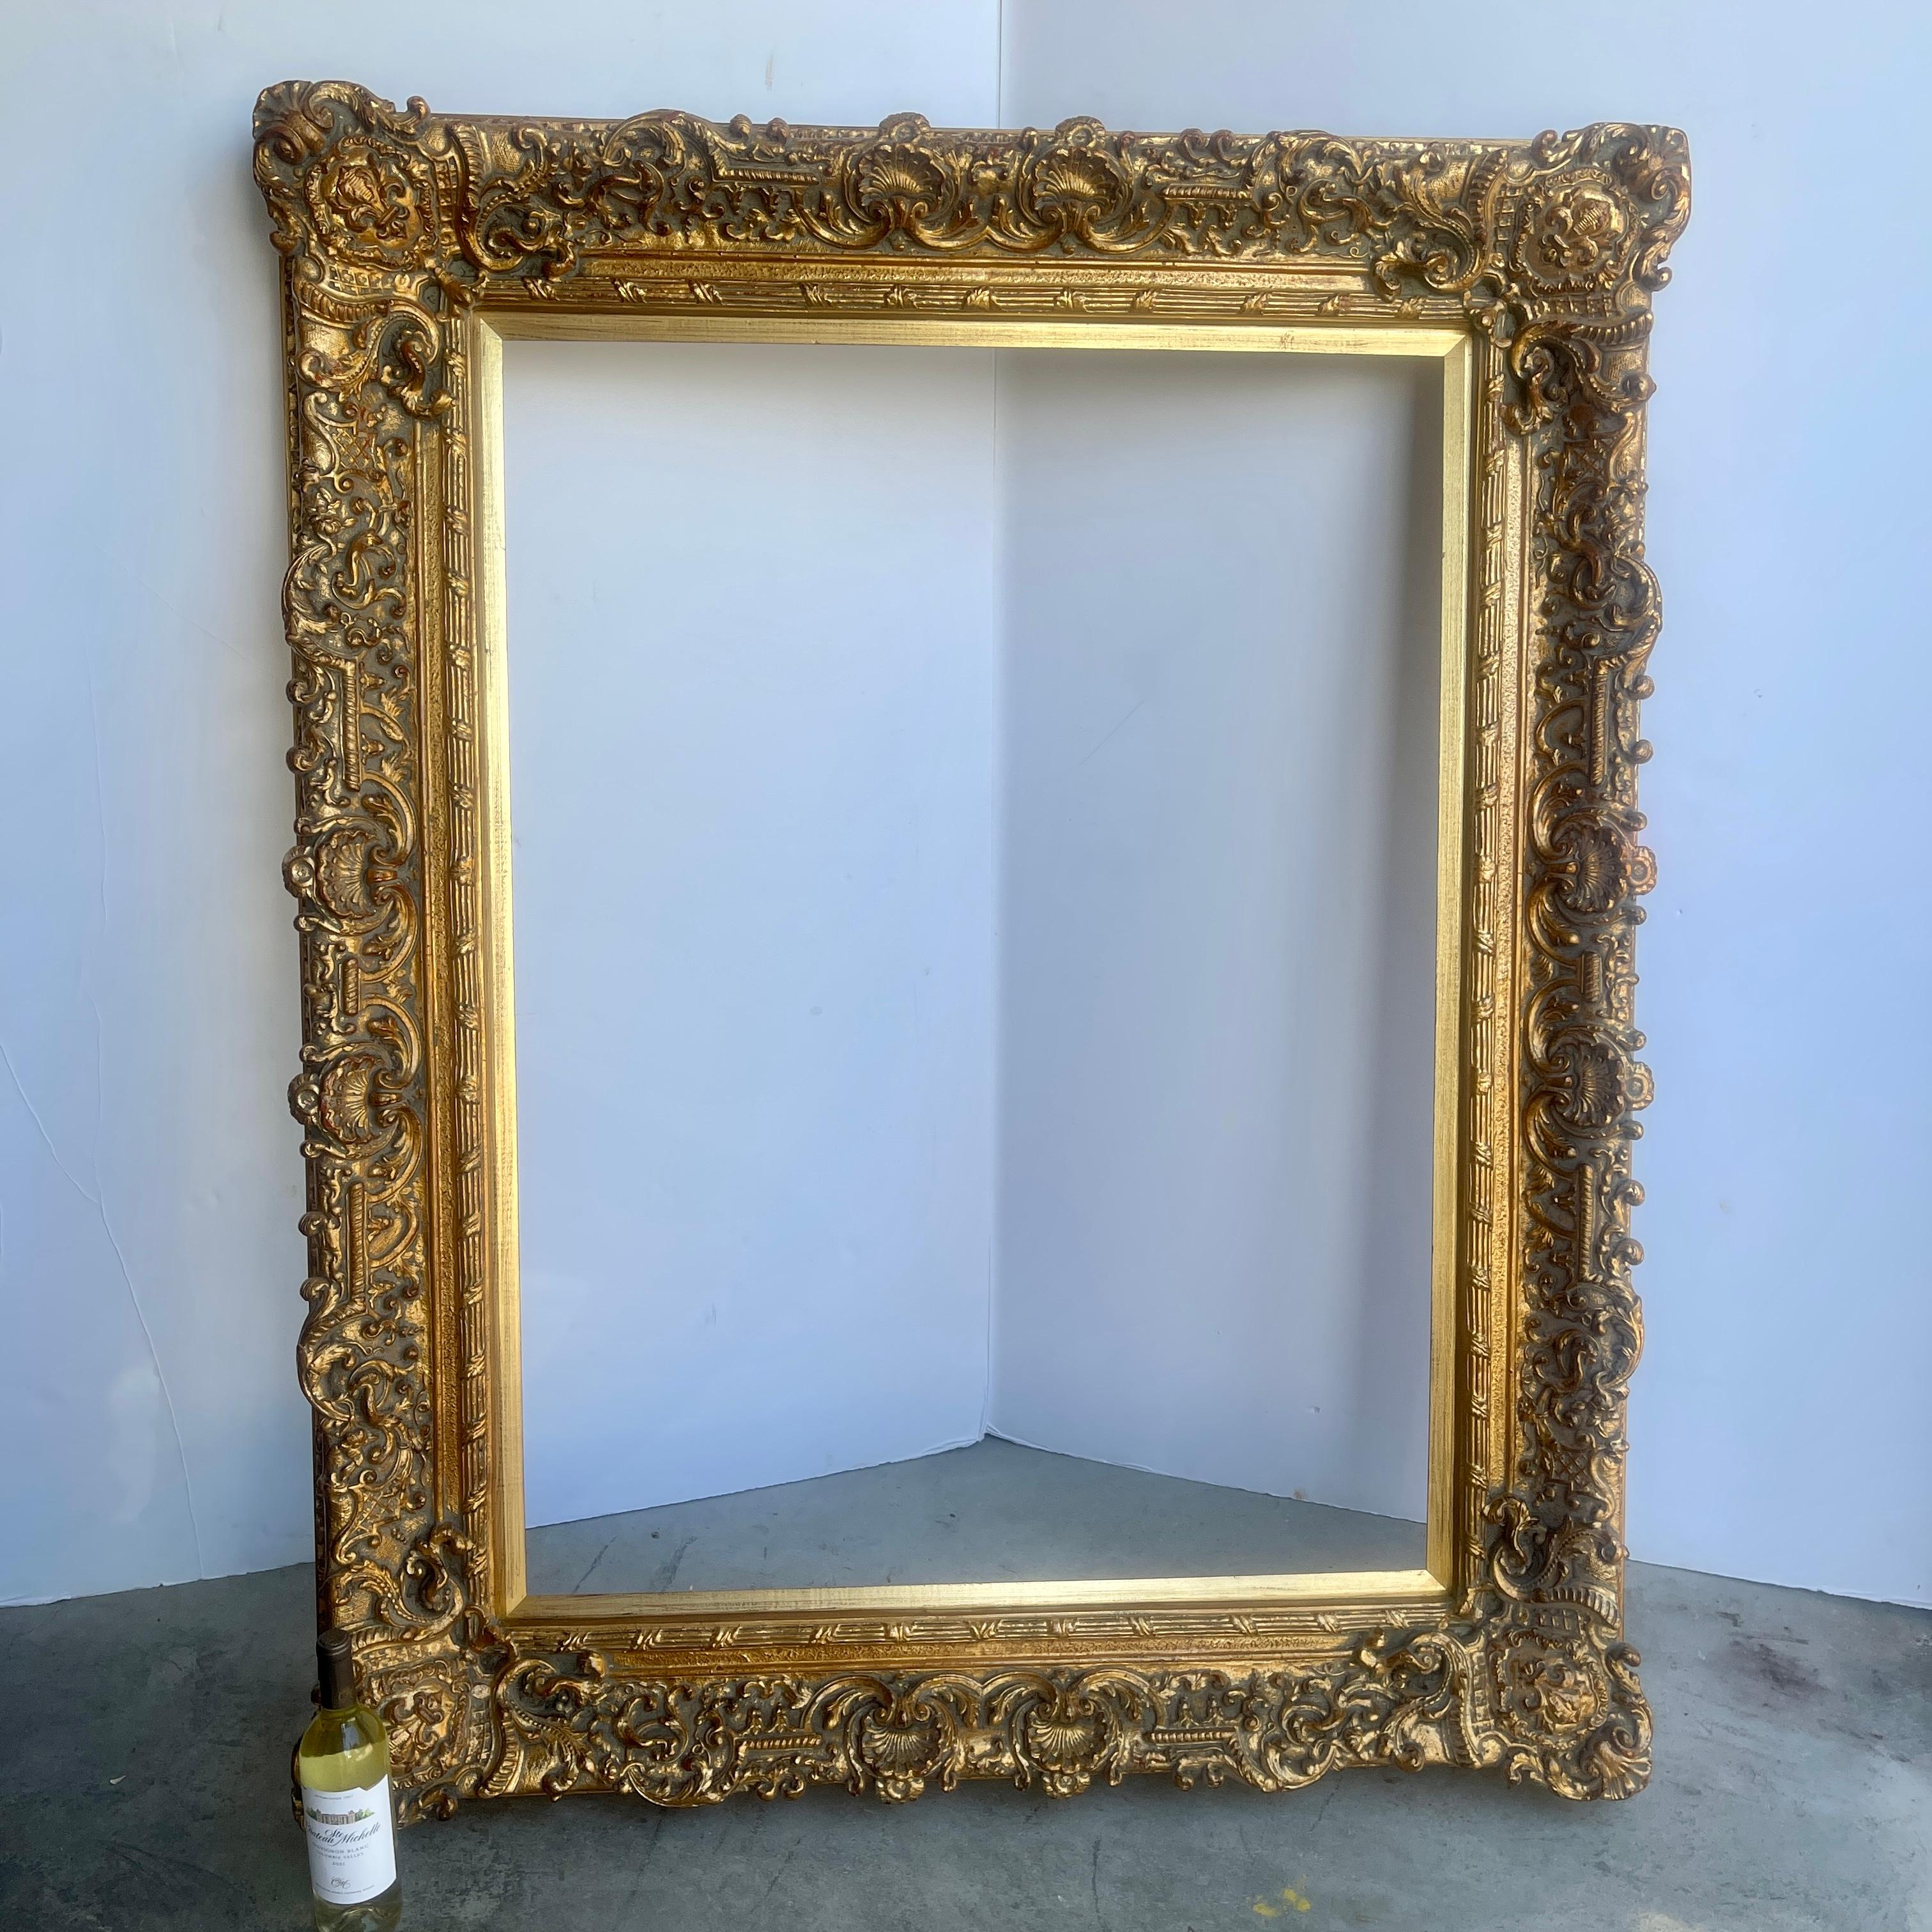 20th Century Large Ornate Carved Gilt Wood Frame, French Rococo Style  For Sale 13